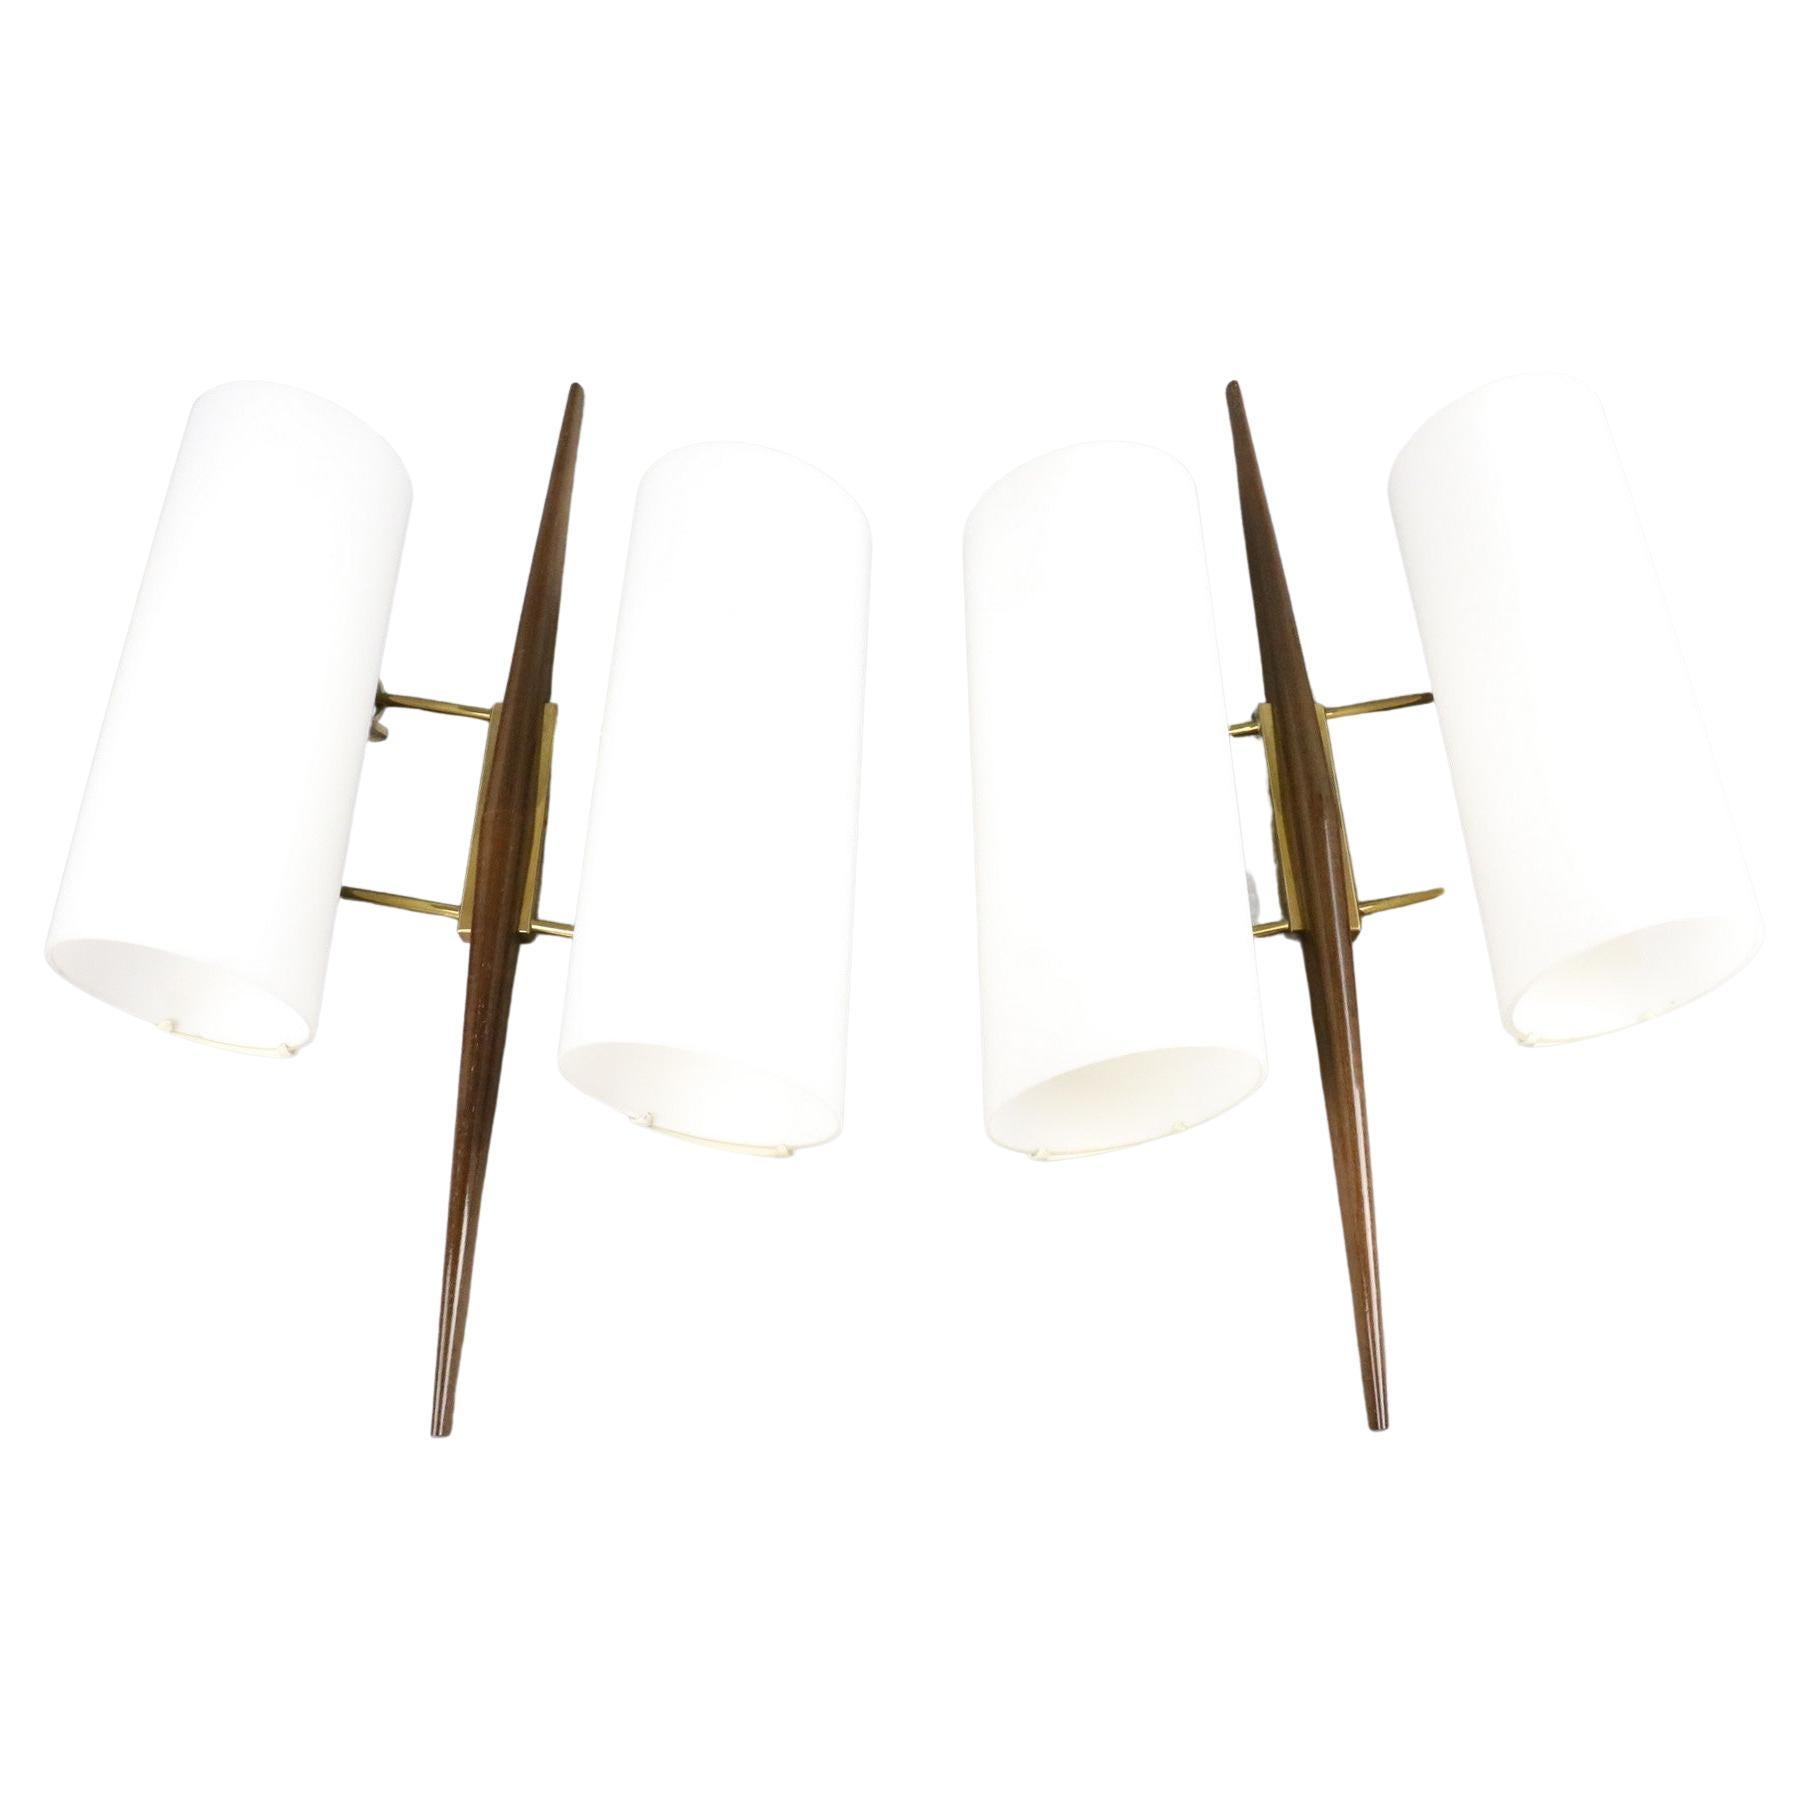 French Maison Arlus, Pair of Mid-Century Modern Double Lighting Wall Lamps 1950s France